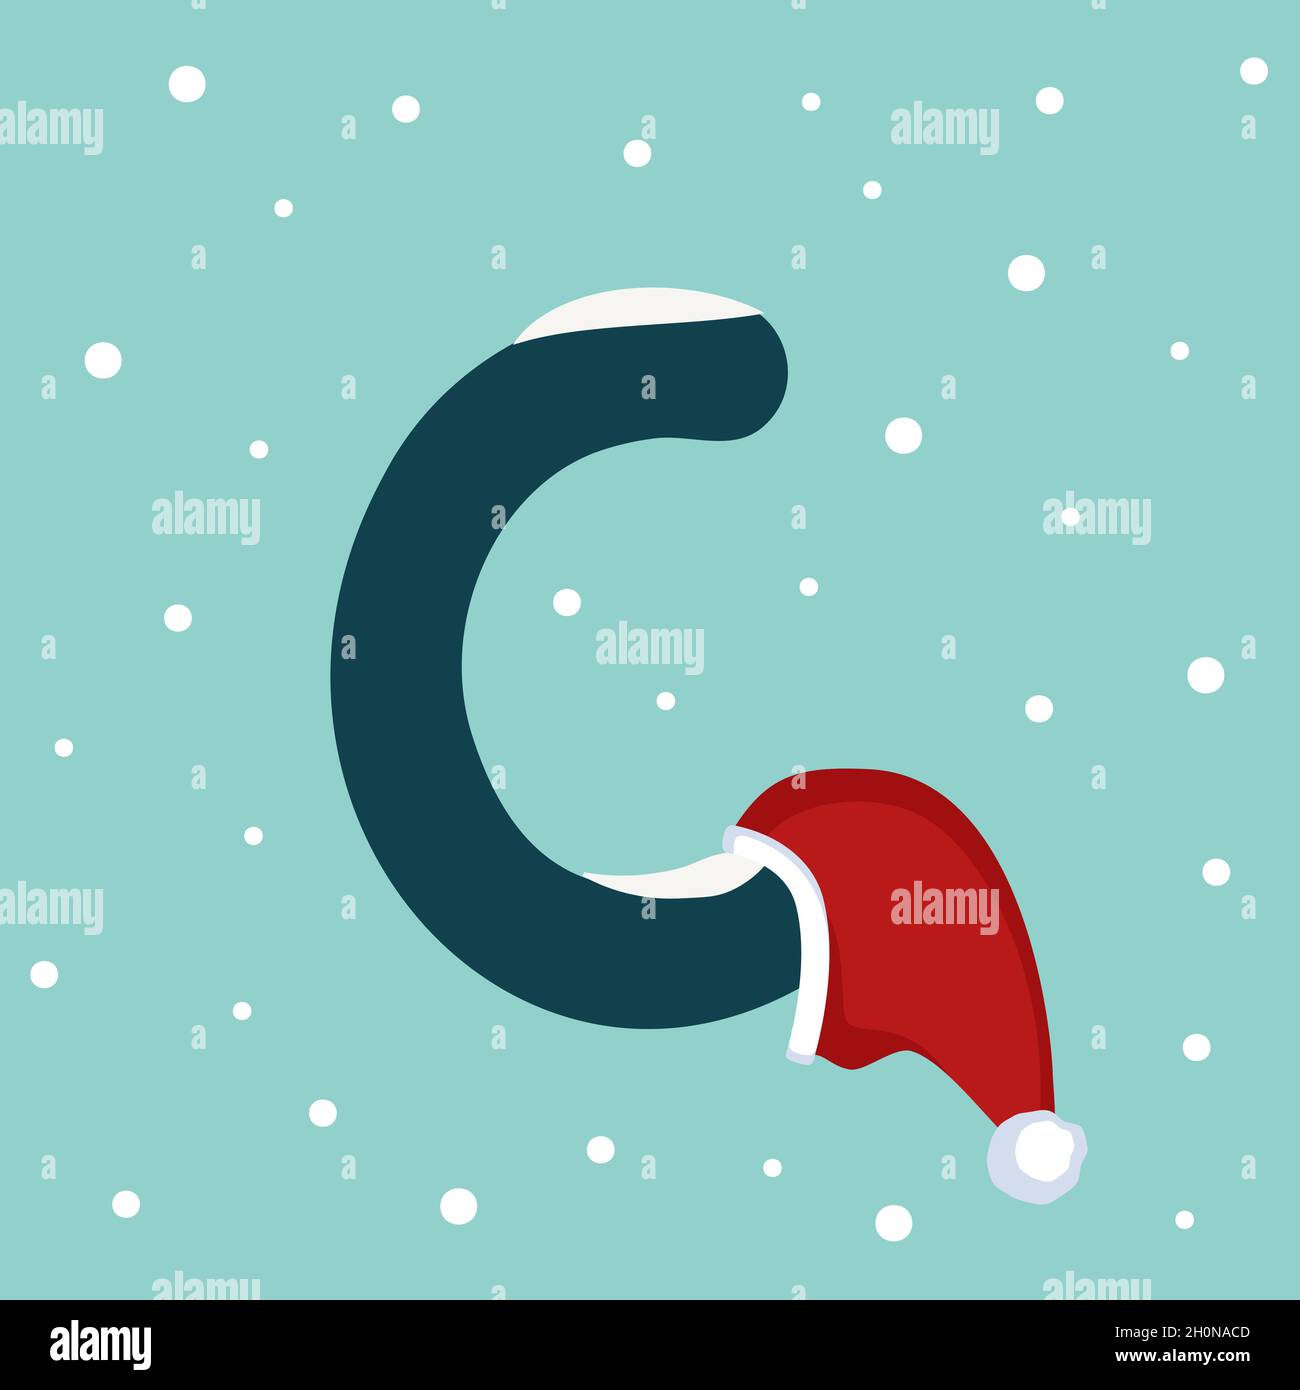 https://c8.alamy.com/comp/2H0NACD/letter-c-with-snow-and-red-santa-claus-hat-festive-font-for-christmas-and-new-year-2H0NACD.jpg